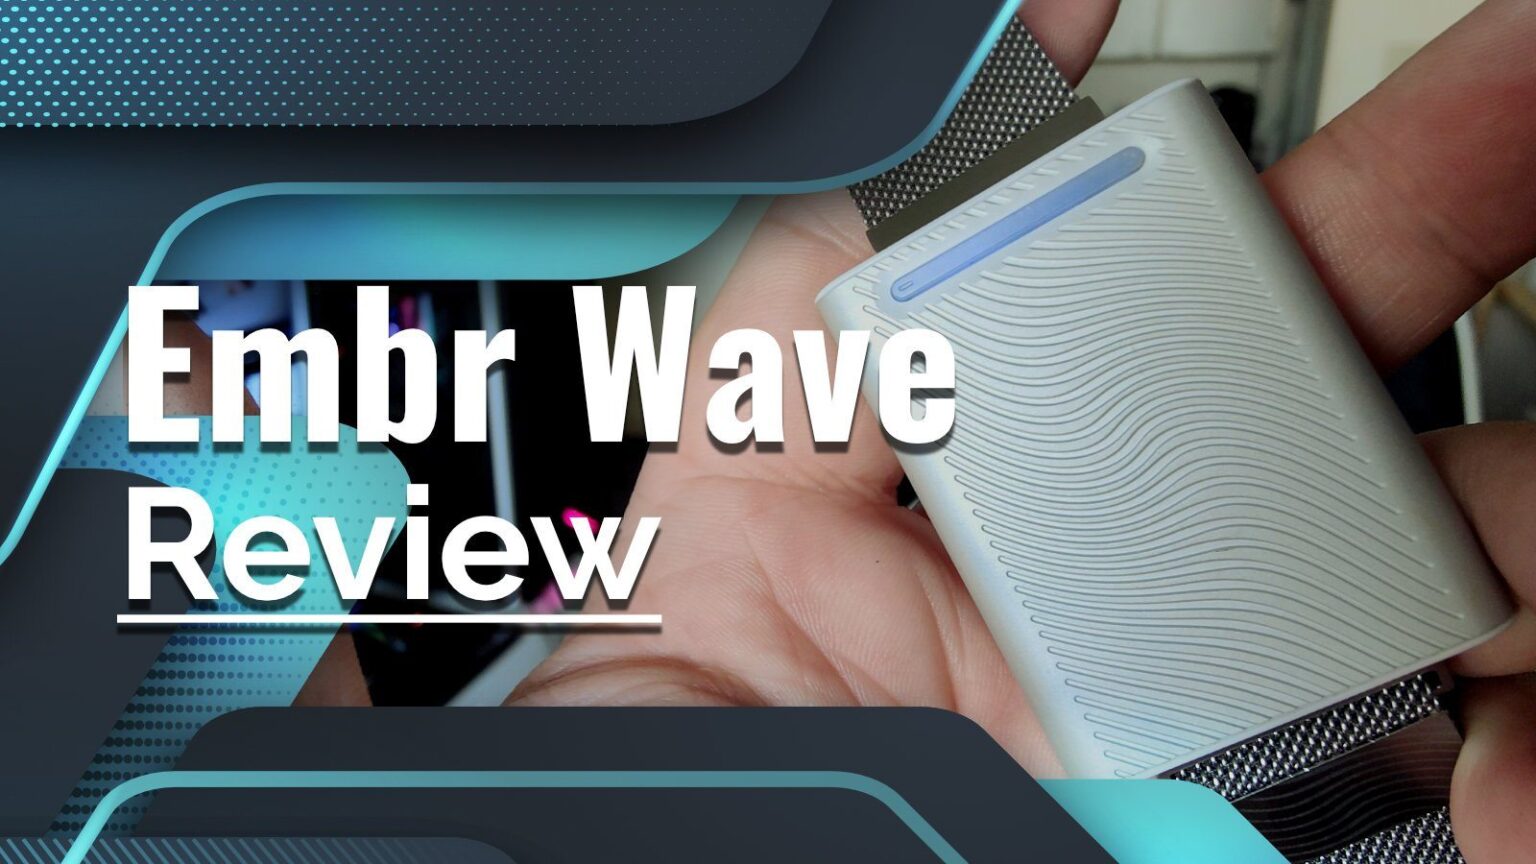 Review Embr Wave Wearable Regulate Your Body's Temperature